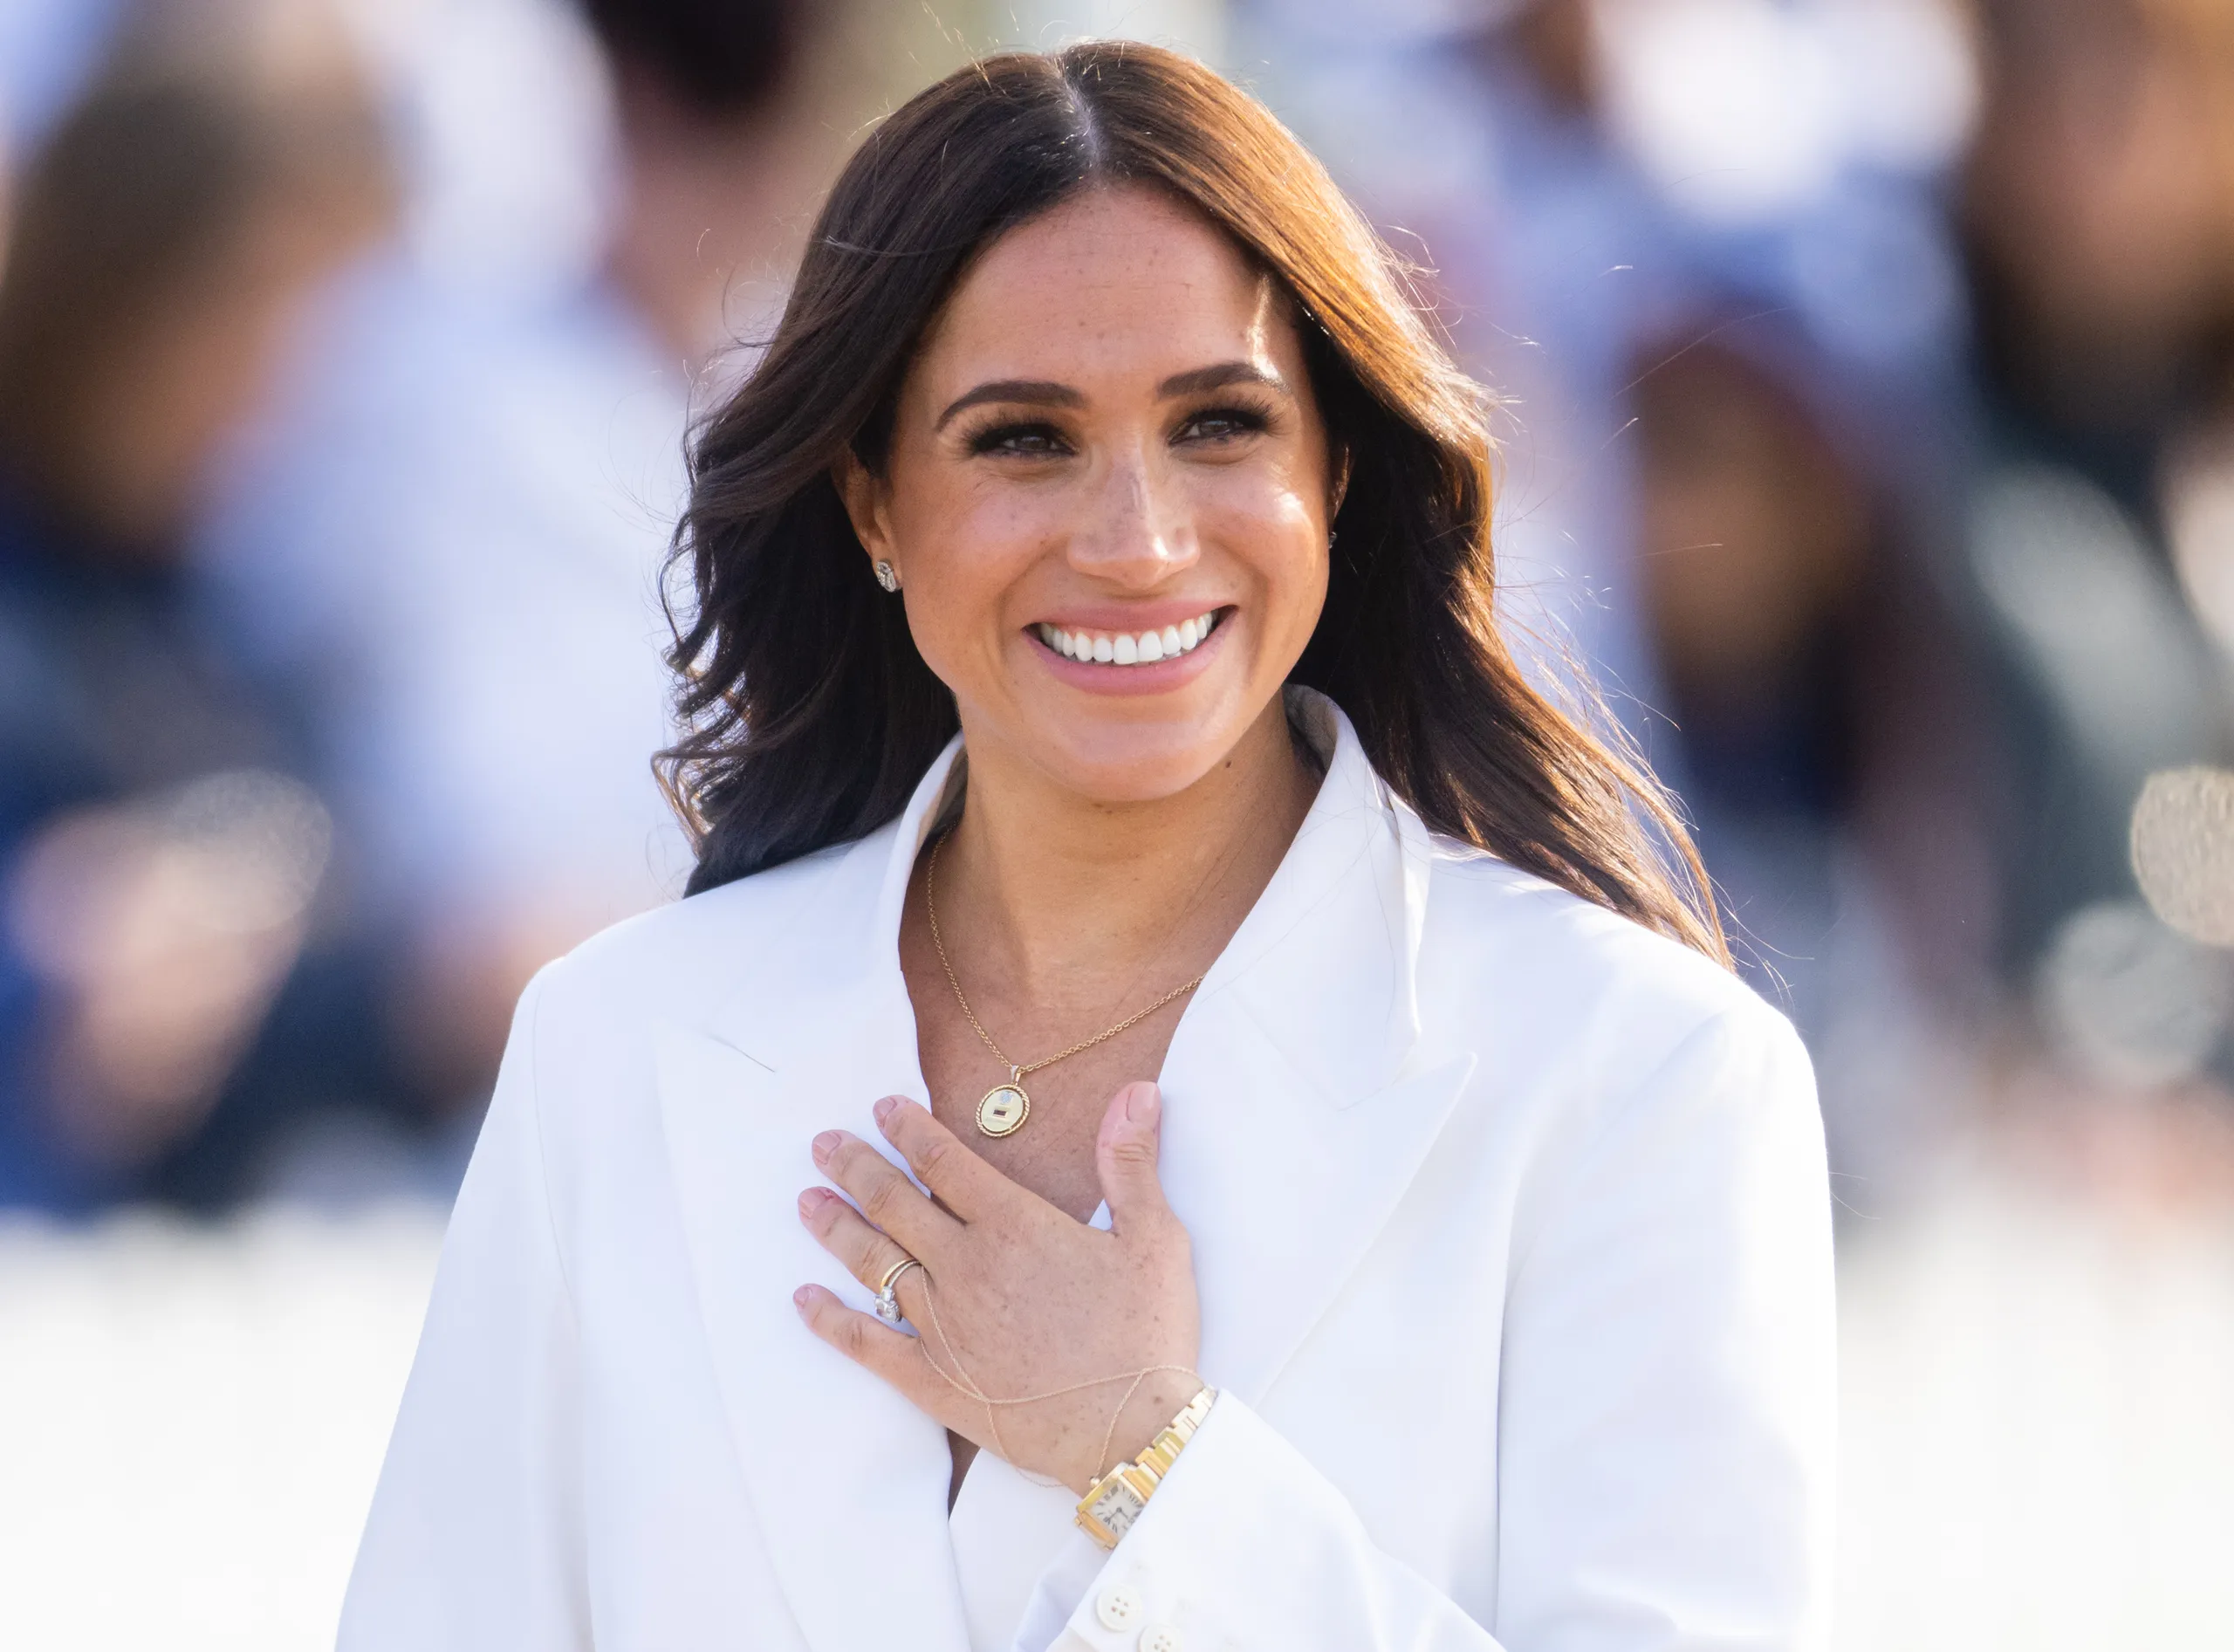 Meghan Markle Duchess of Sussex Biography